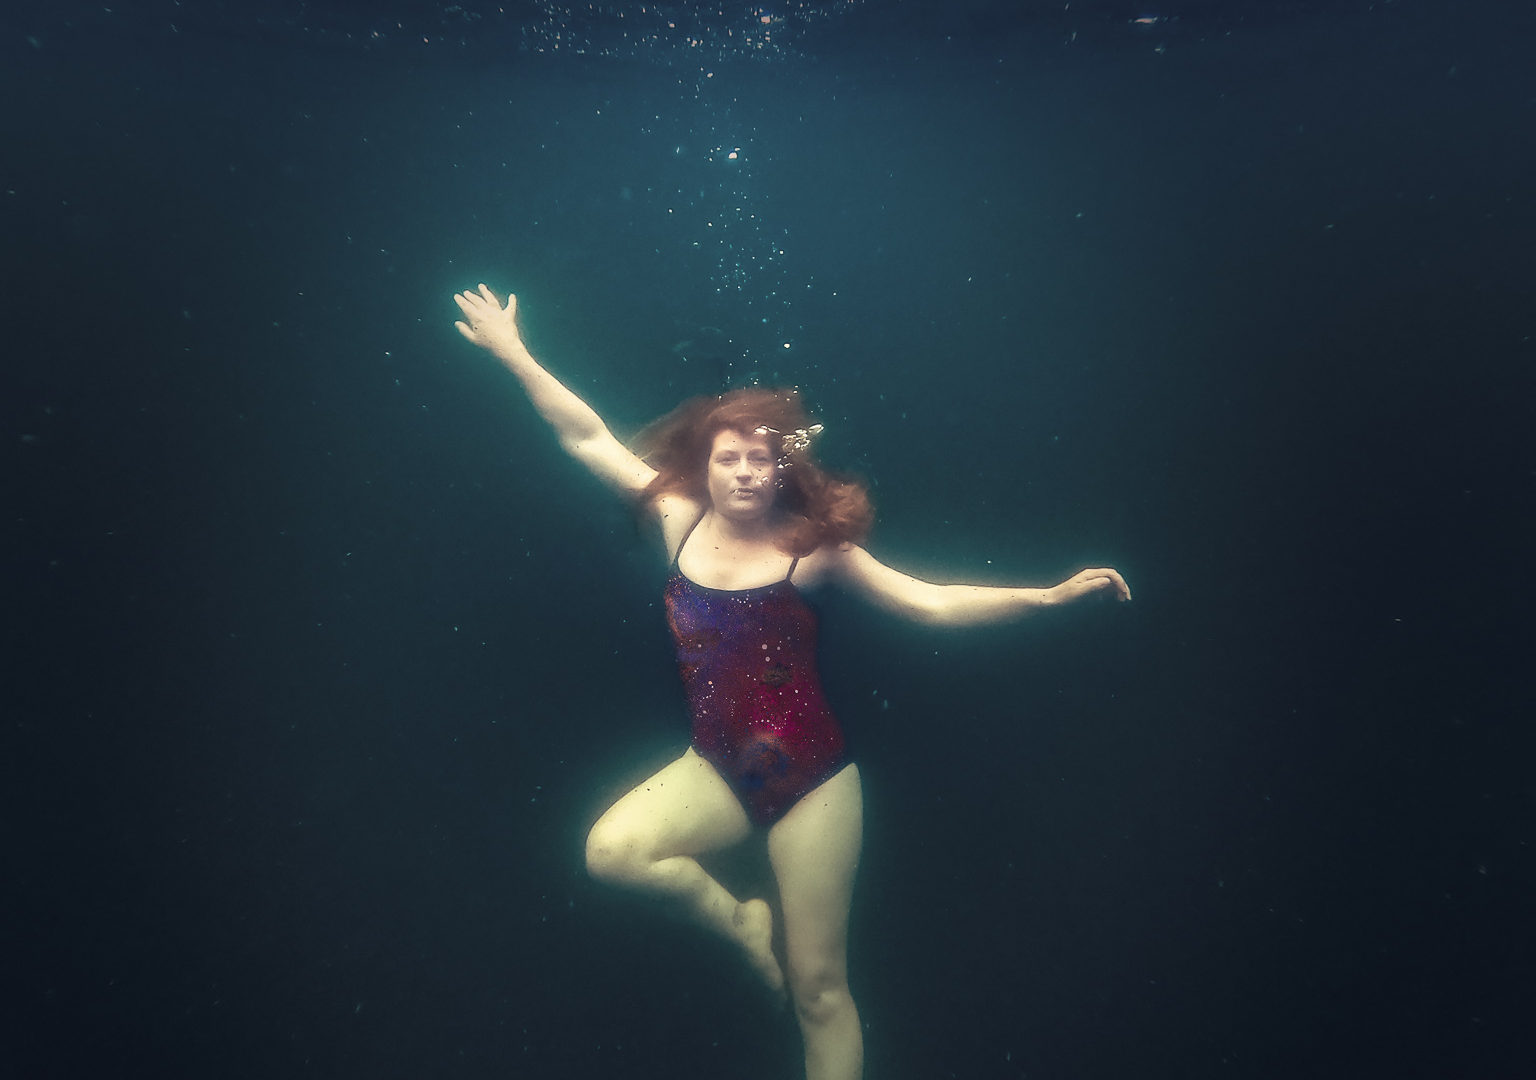 Ethereal photo of a woman underwater